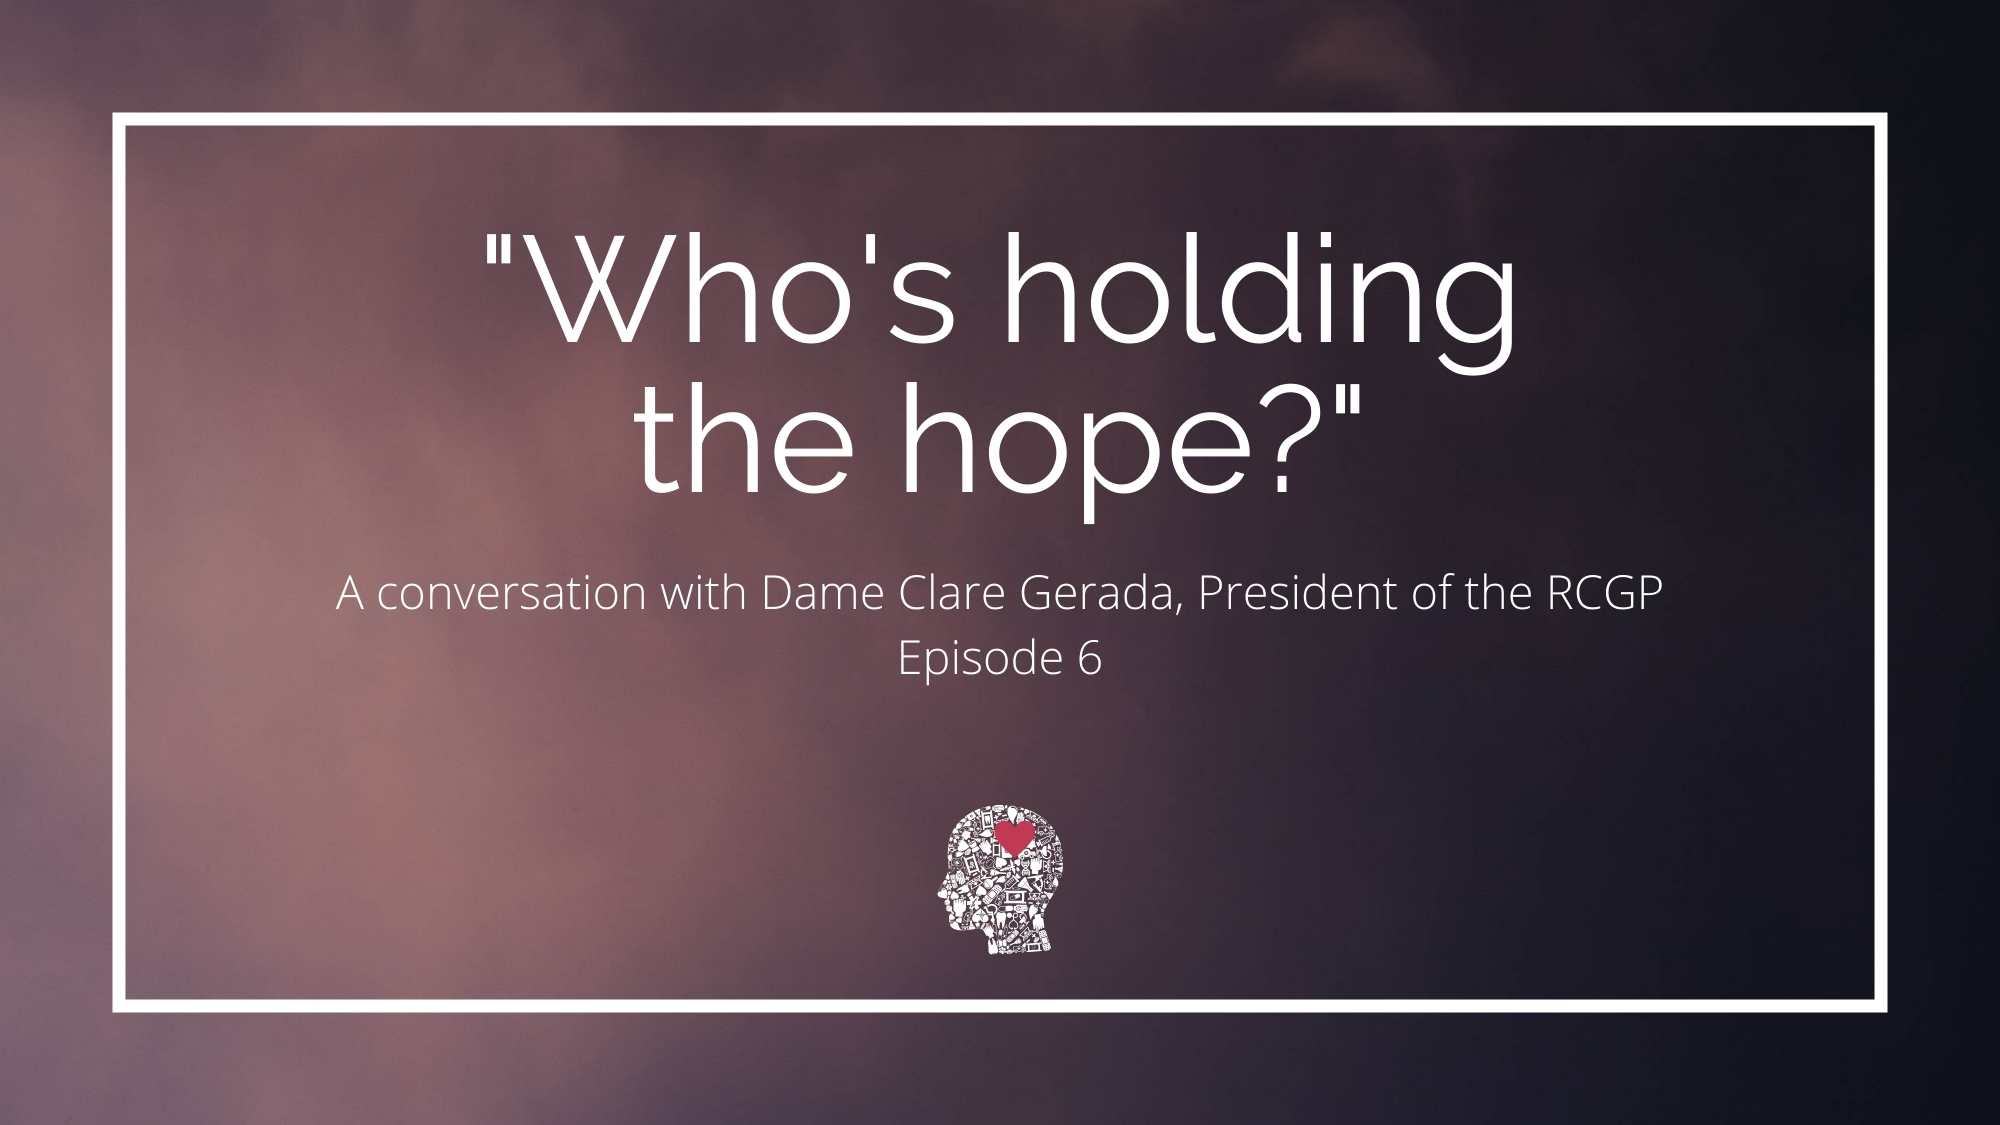 Who's golding the hope - Dame clare Gerada